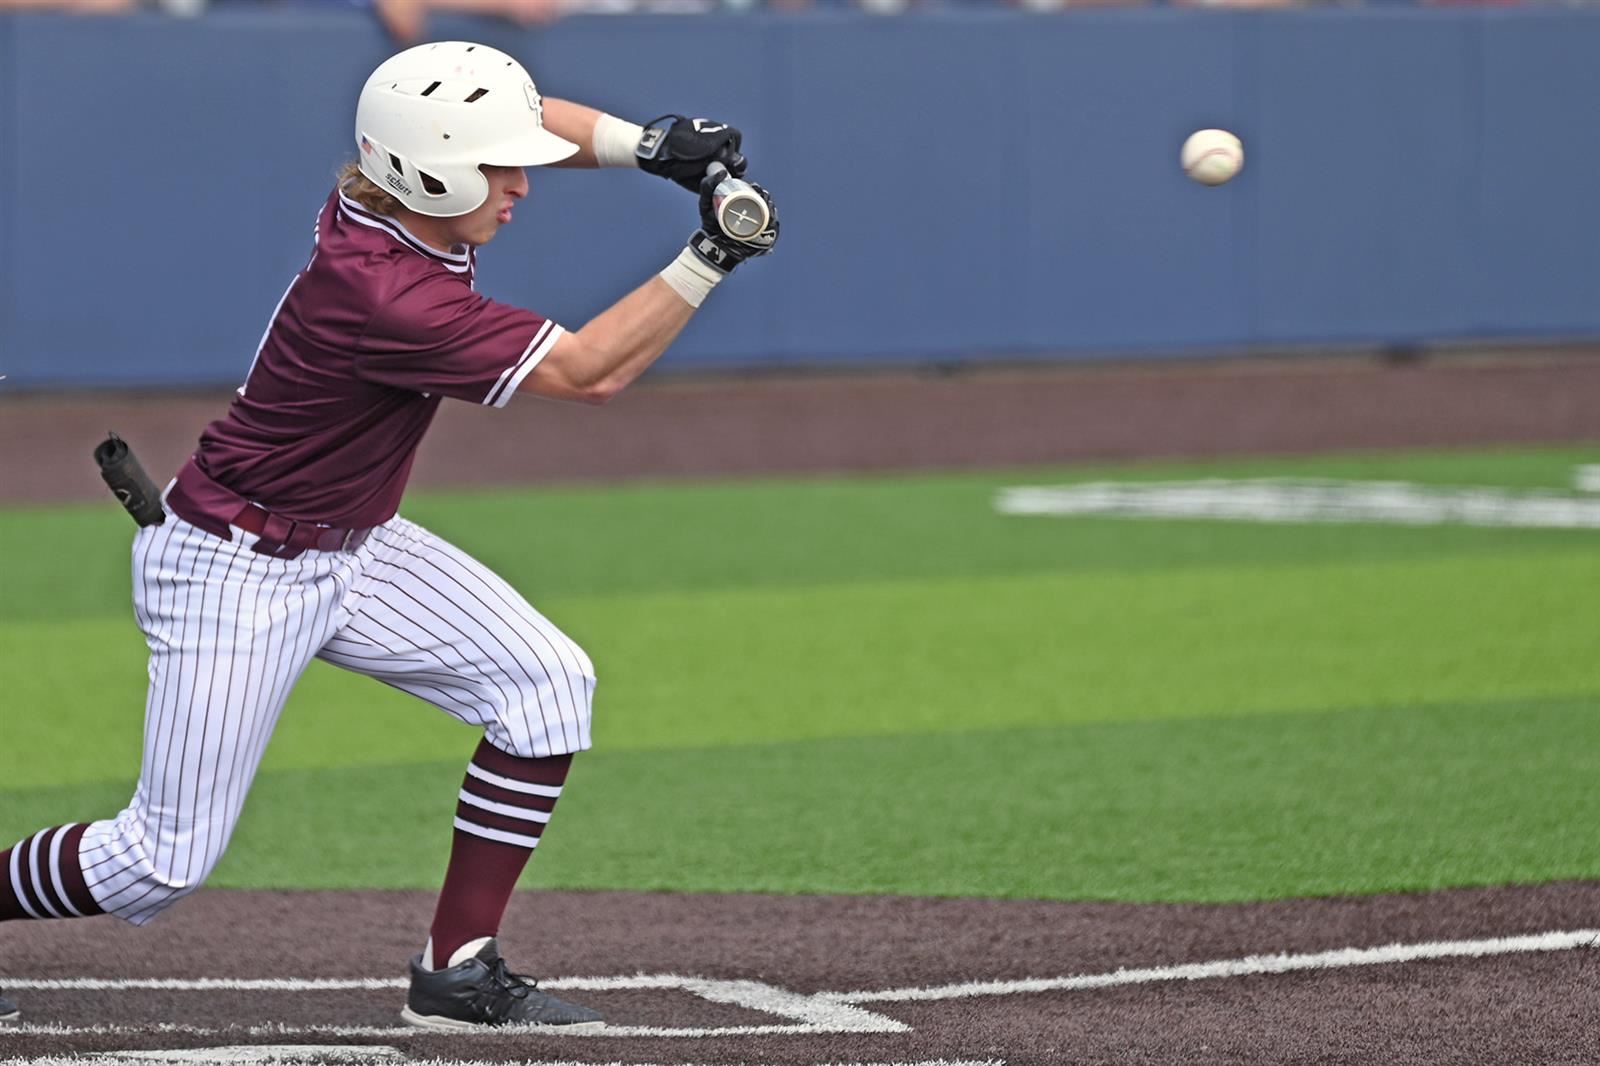 Cy-Fair graduate Kyle Chambers was named to the Texas High School Baseball Coaches Association Class 6A All-State.